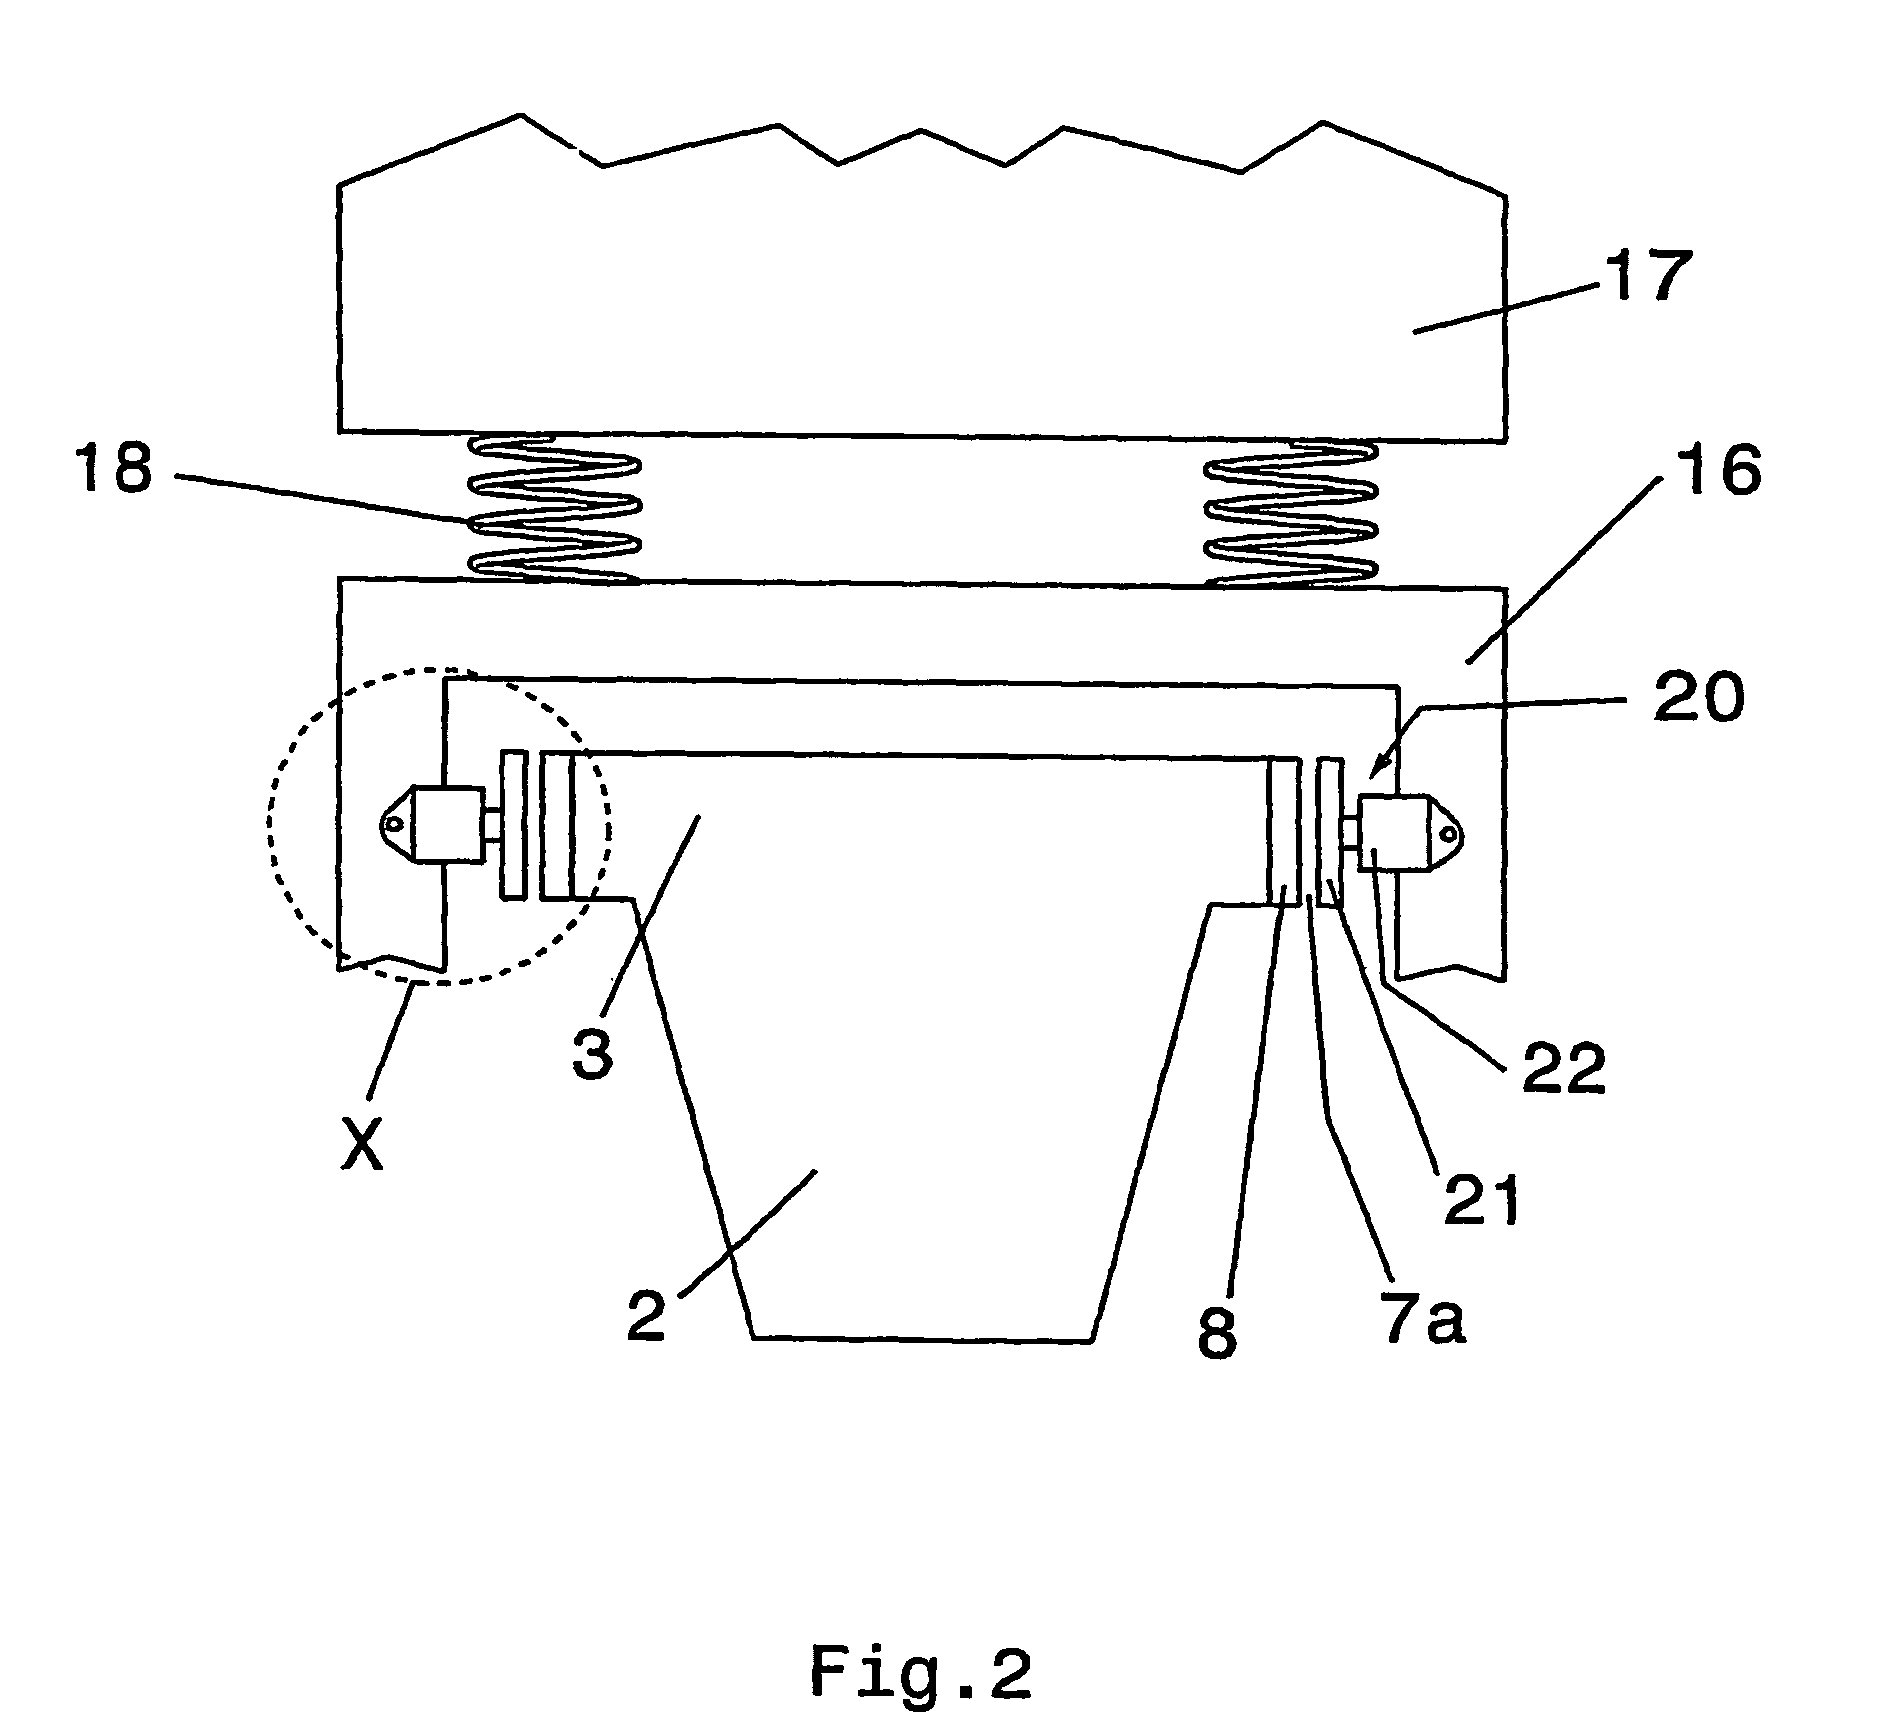 Magnetic levitation train provided with an eddy-current brake